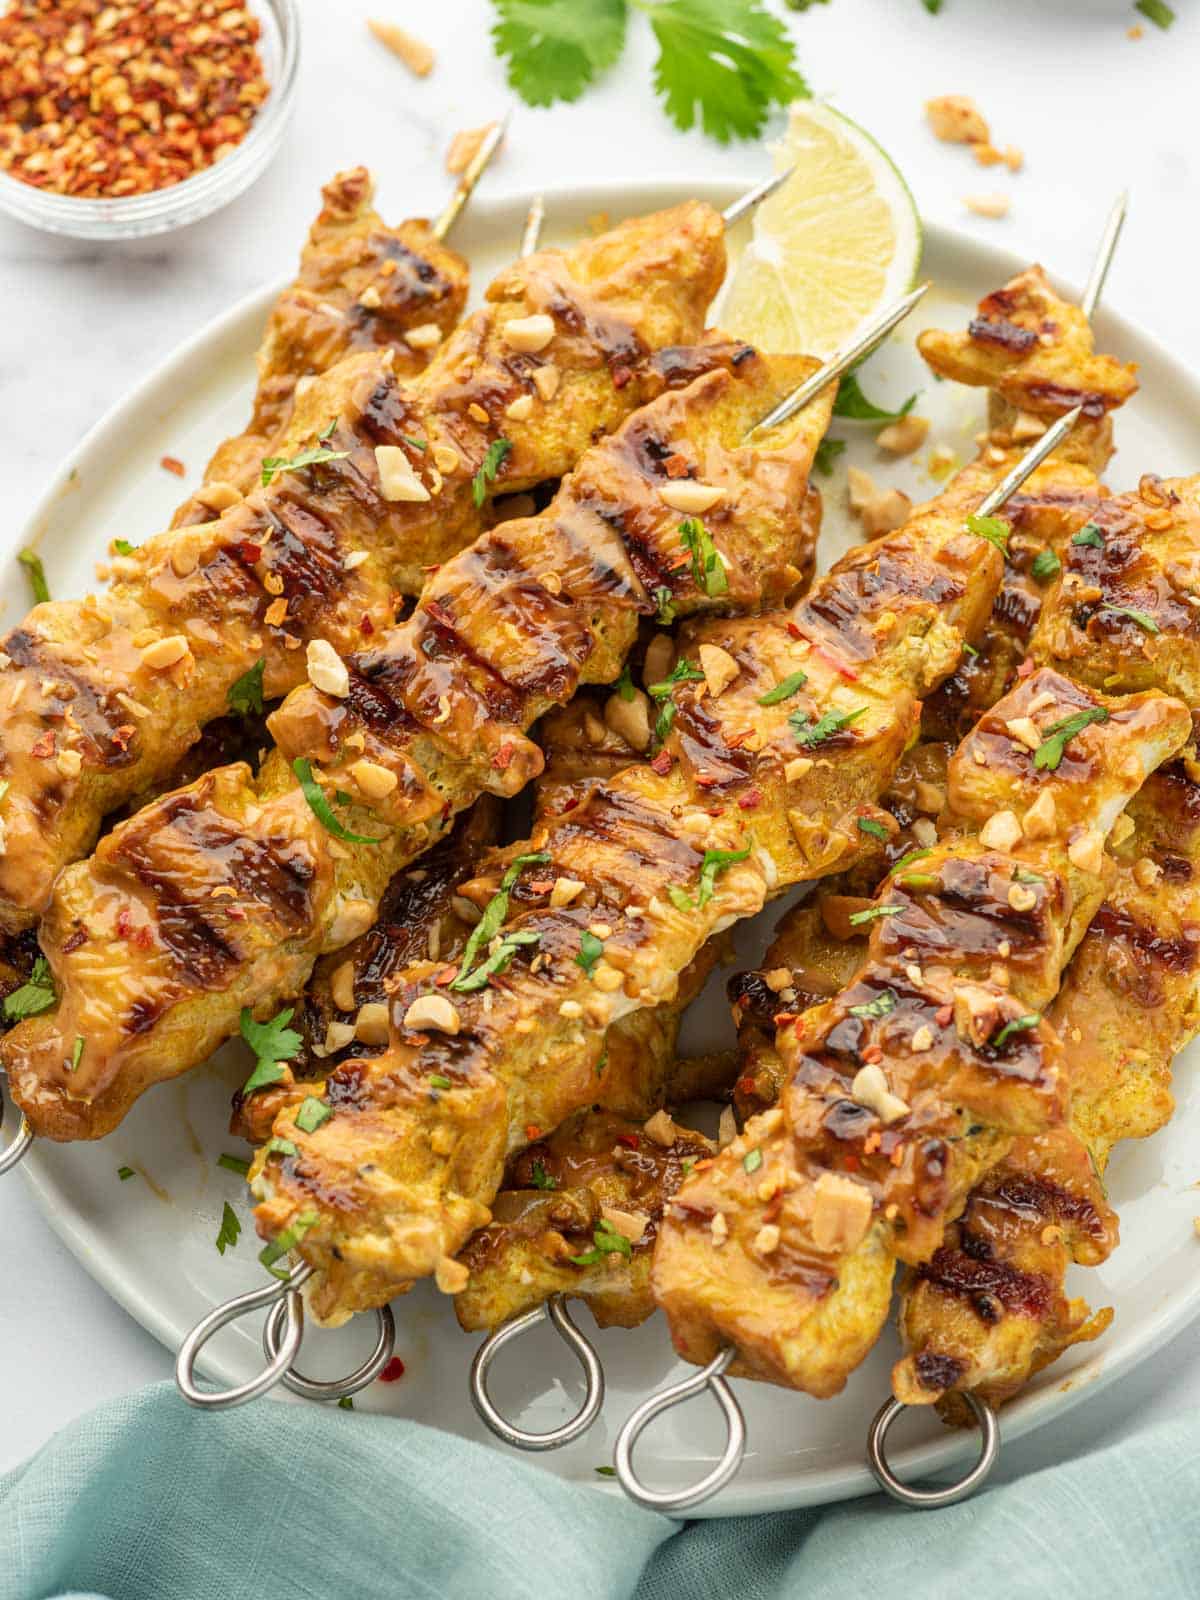 Chicken with peanut sauce skewers on a platter.